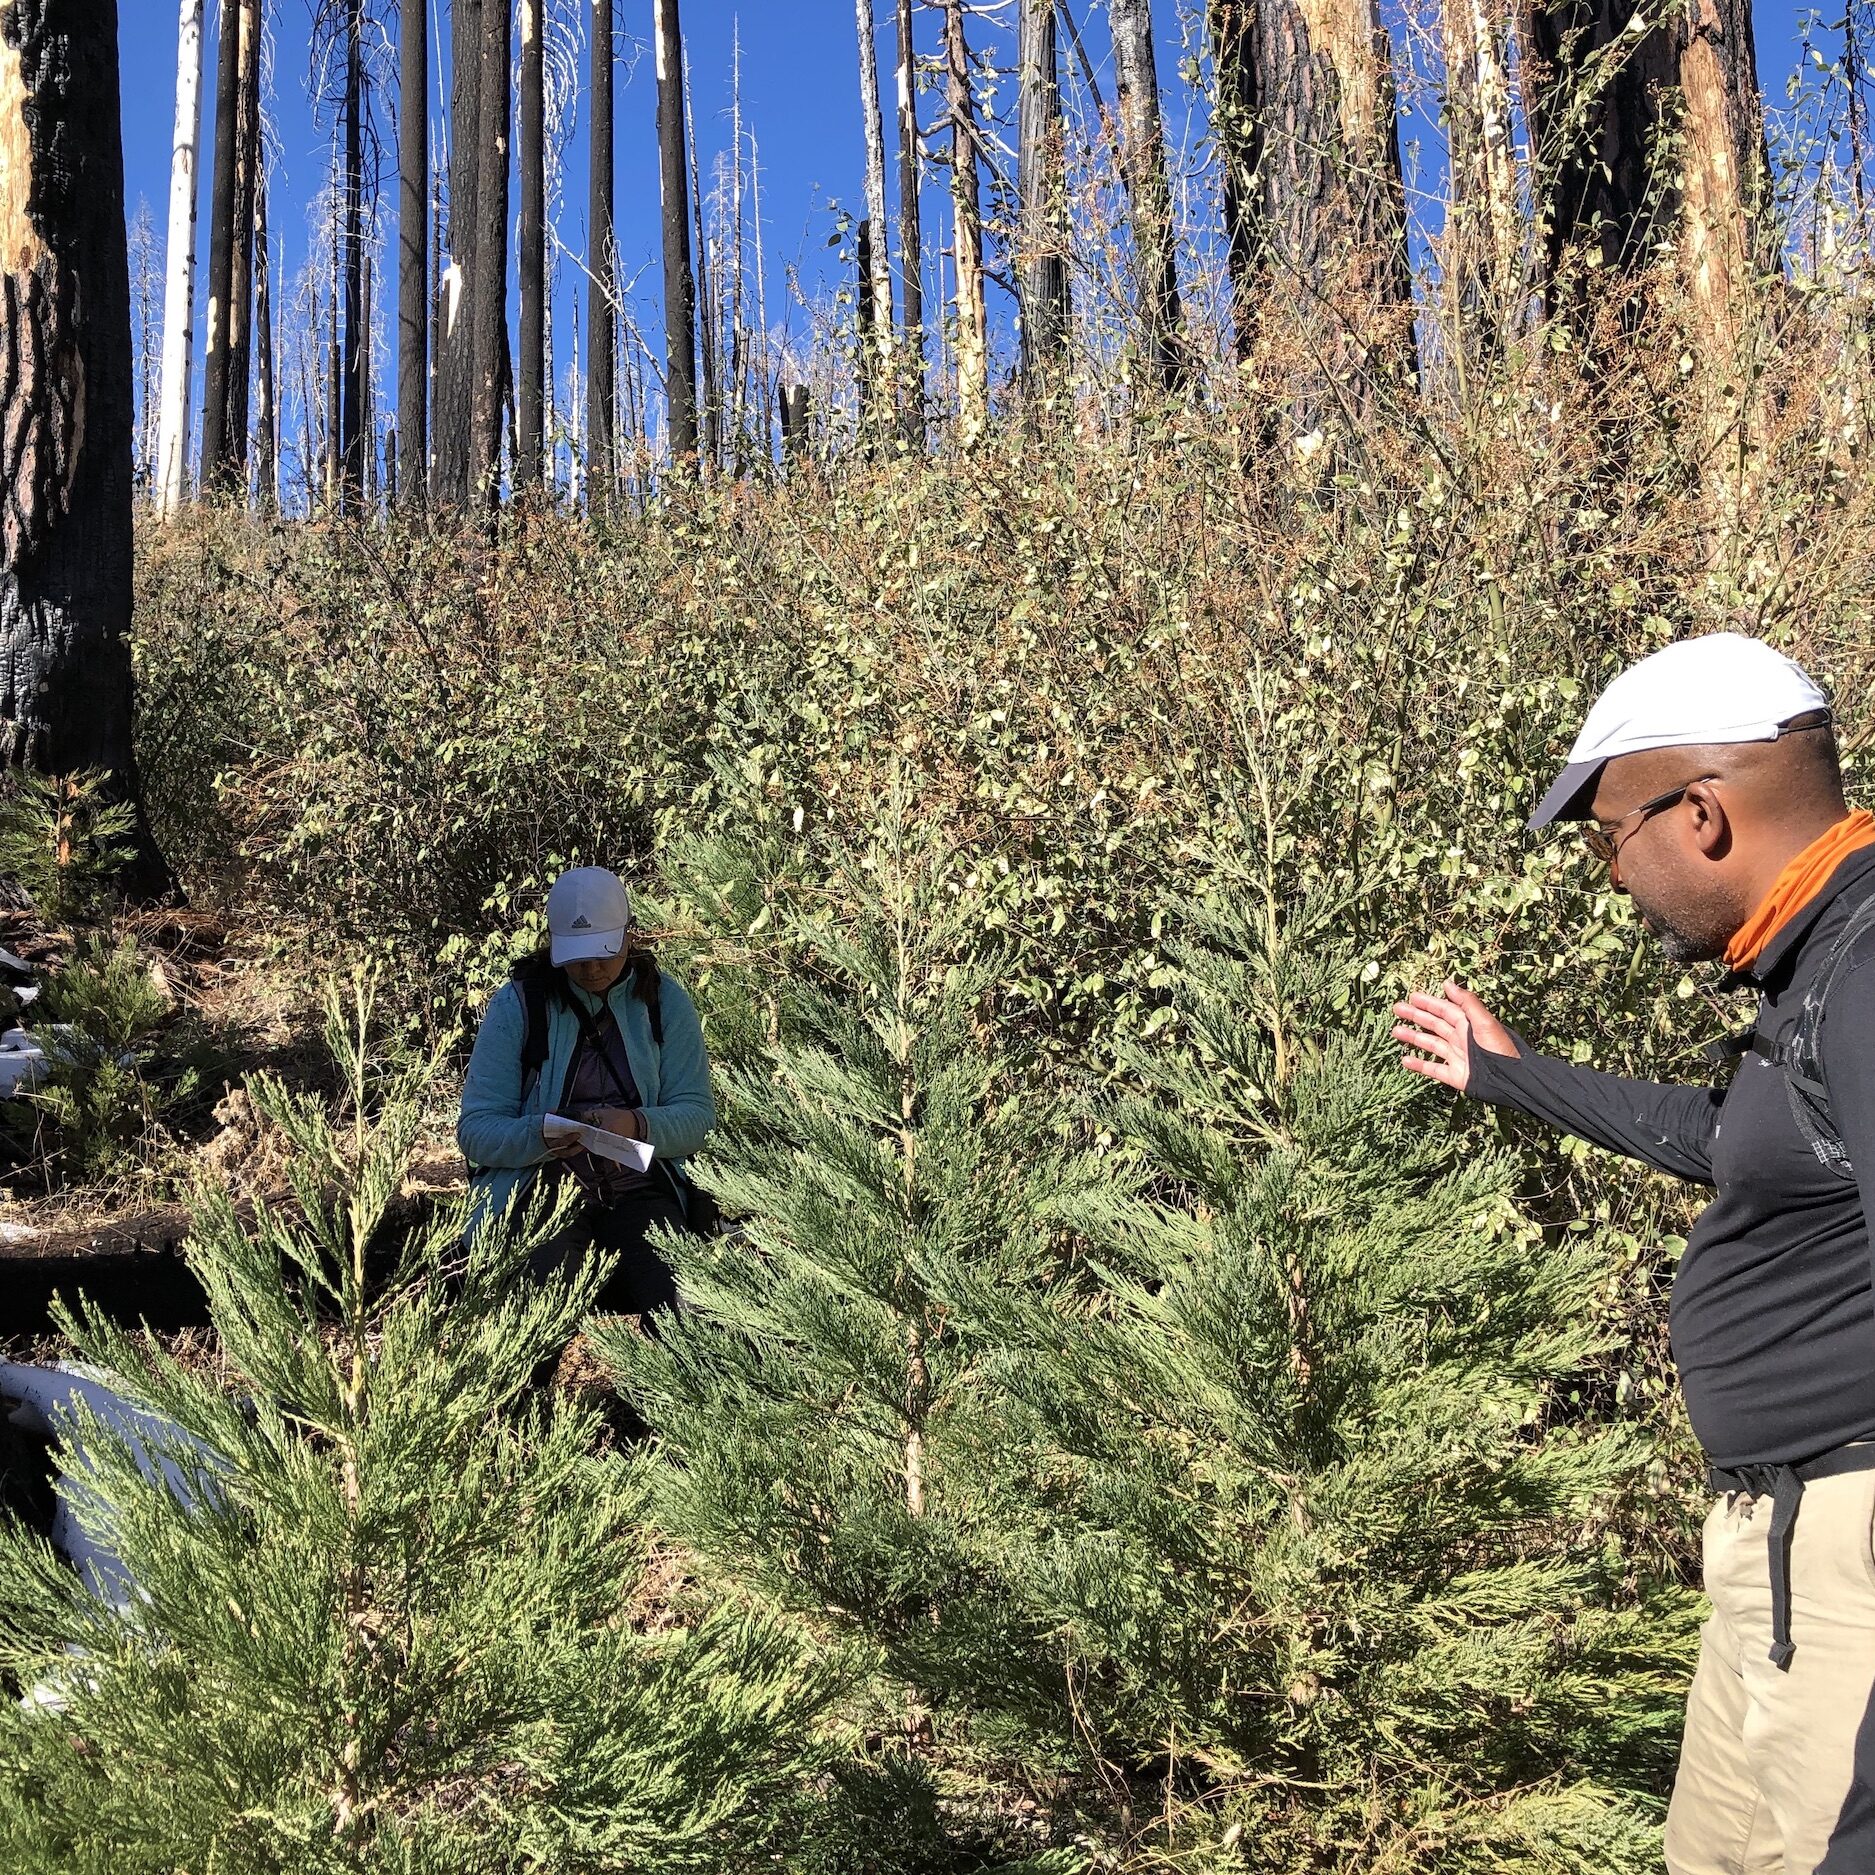 JMP colleagues, Tonja Chi and Dr. Michael Dorsey, amidst abundant natural post-fire reproduction of giant sequoias in the Nelder Grove, Sierra National Forest, Fall of 2022.